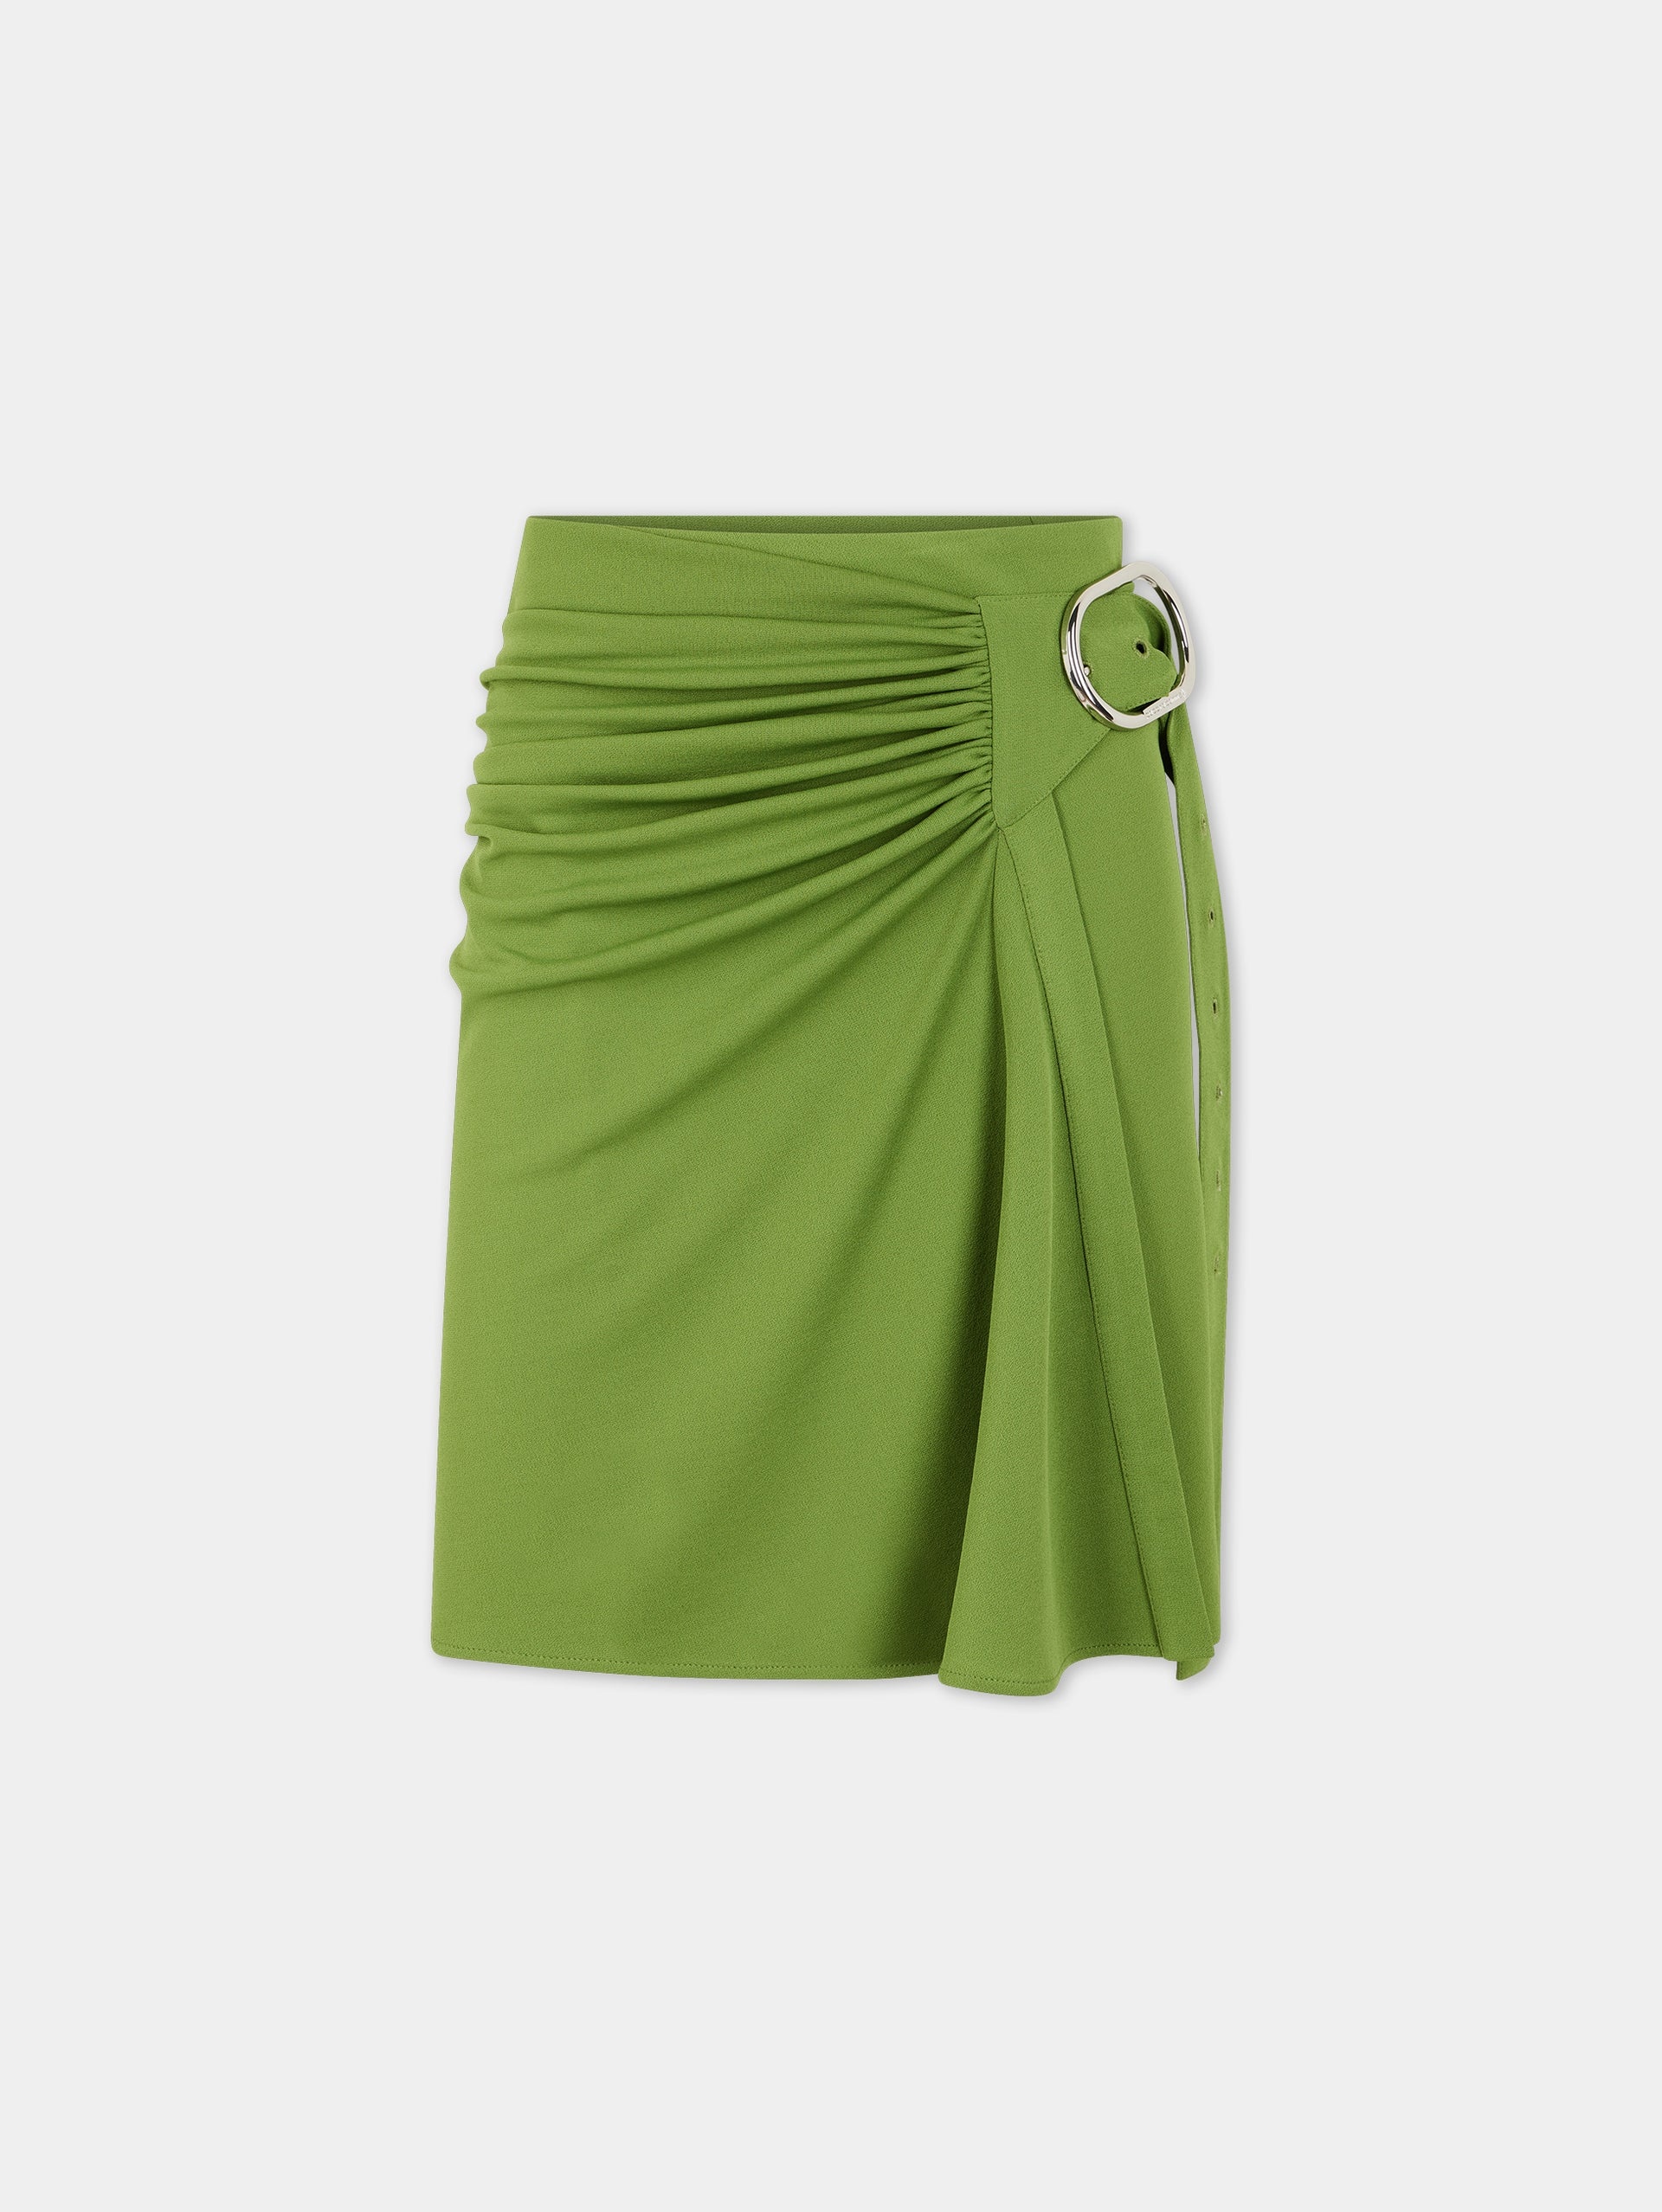 GREEN DRAPED SKIRT WITH PIERCING DETAIL - 1